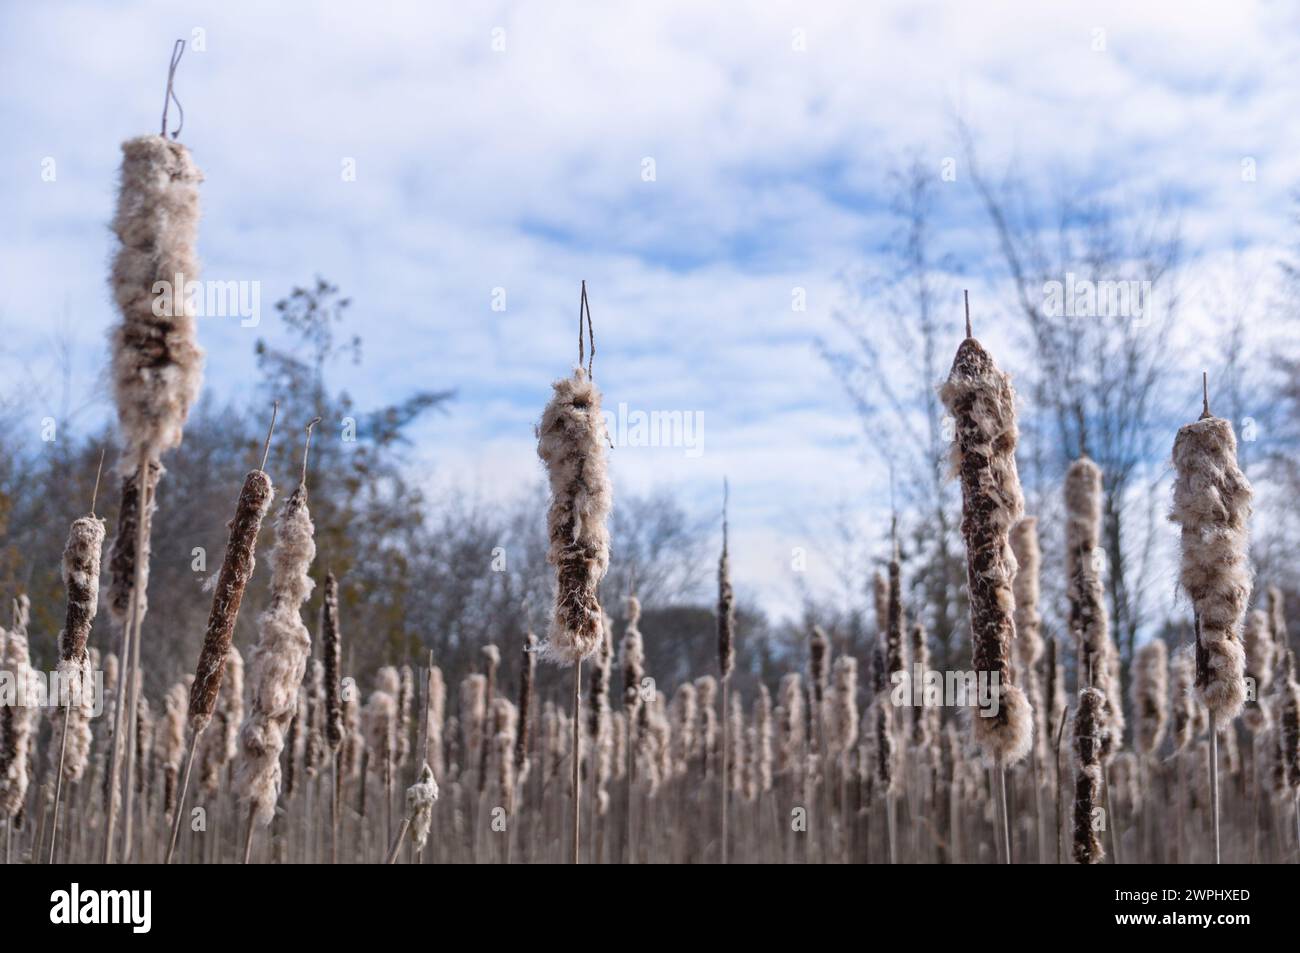 Nature gems - fluffy white and brown bulrush cattail tops against a blue sky with white clouds Stock Photo